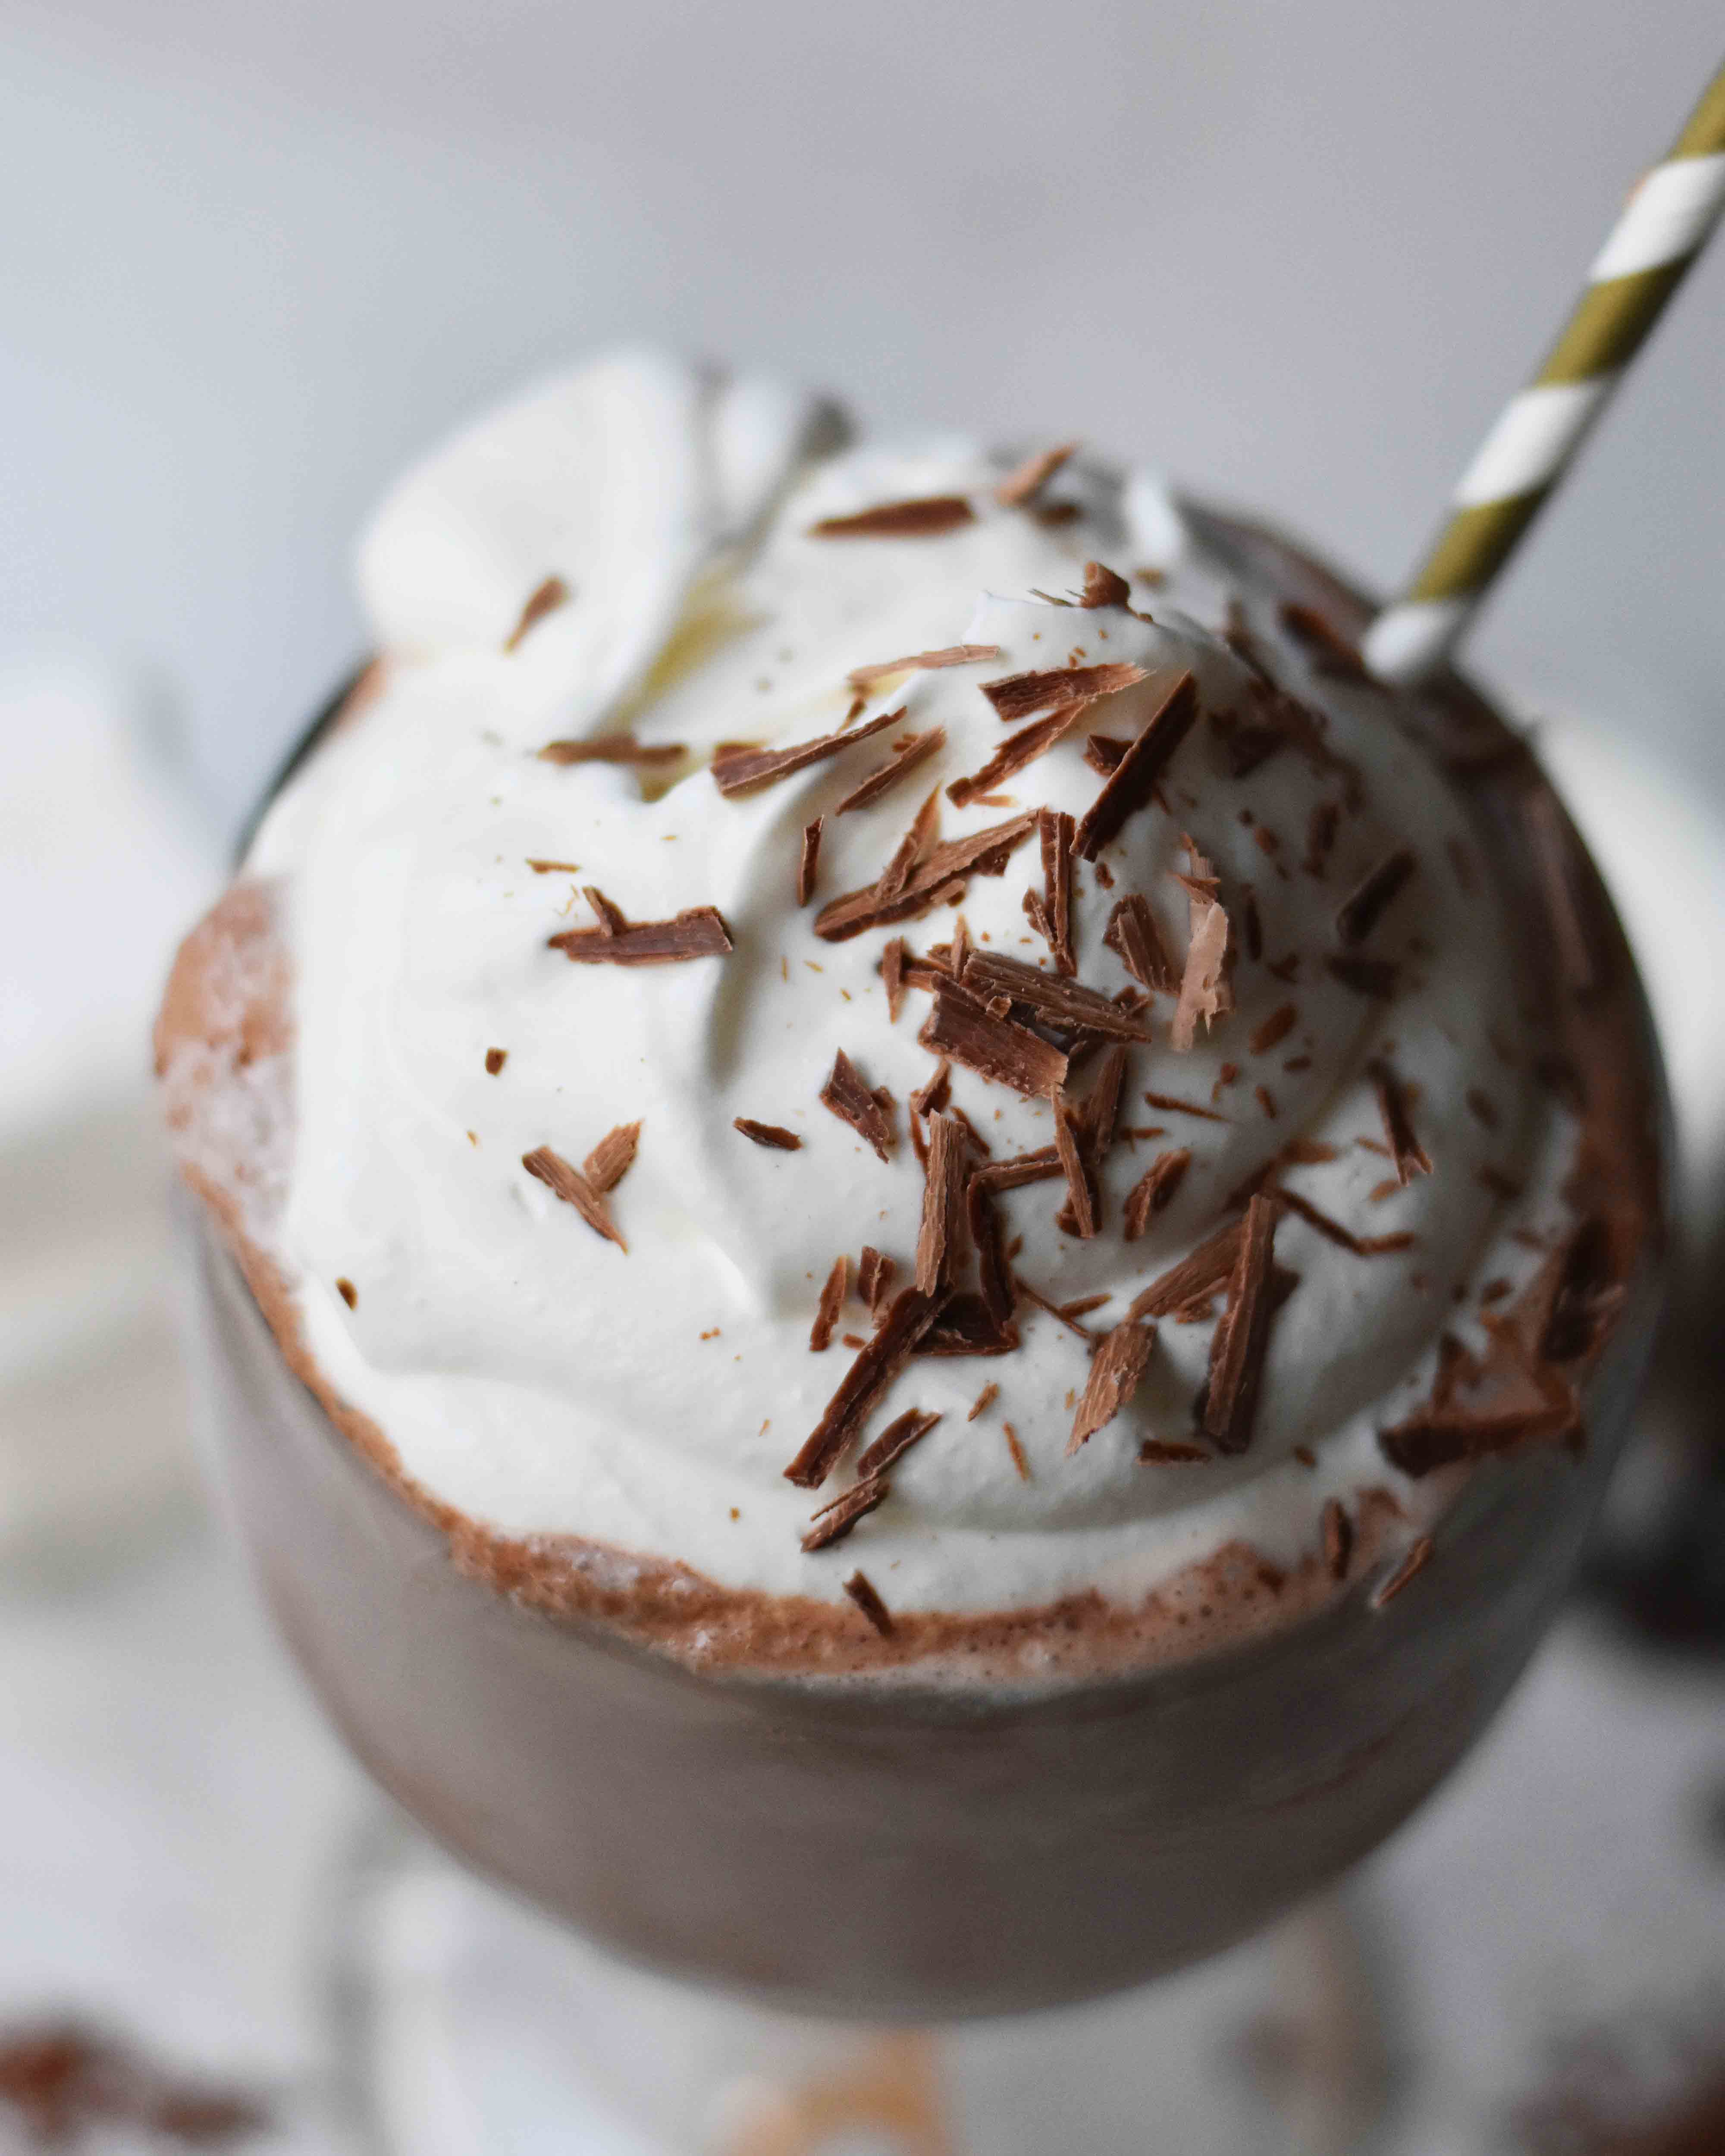 Frozen Hot Chocolate is a famous New York City dessert found at Serendipity. It is a rich chocolate drink served cold with whipped cream and chocolate shavings. How to make perfect frozen hot chocolate at home. www.modernhoney.com